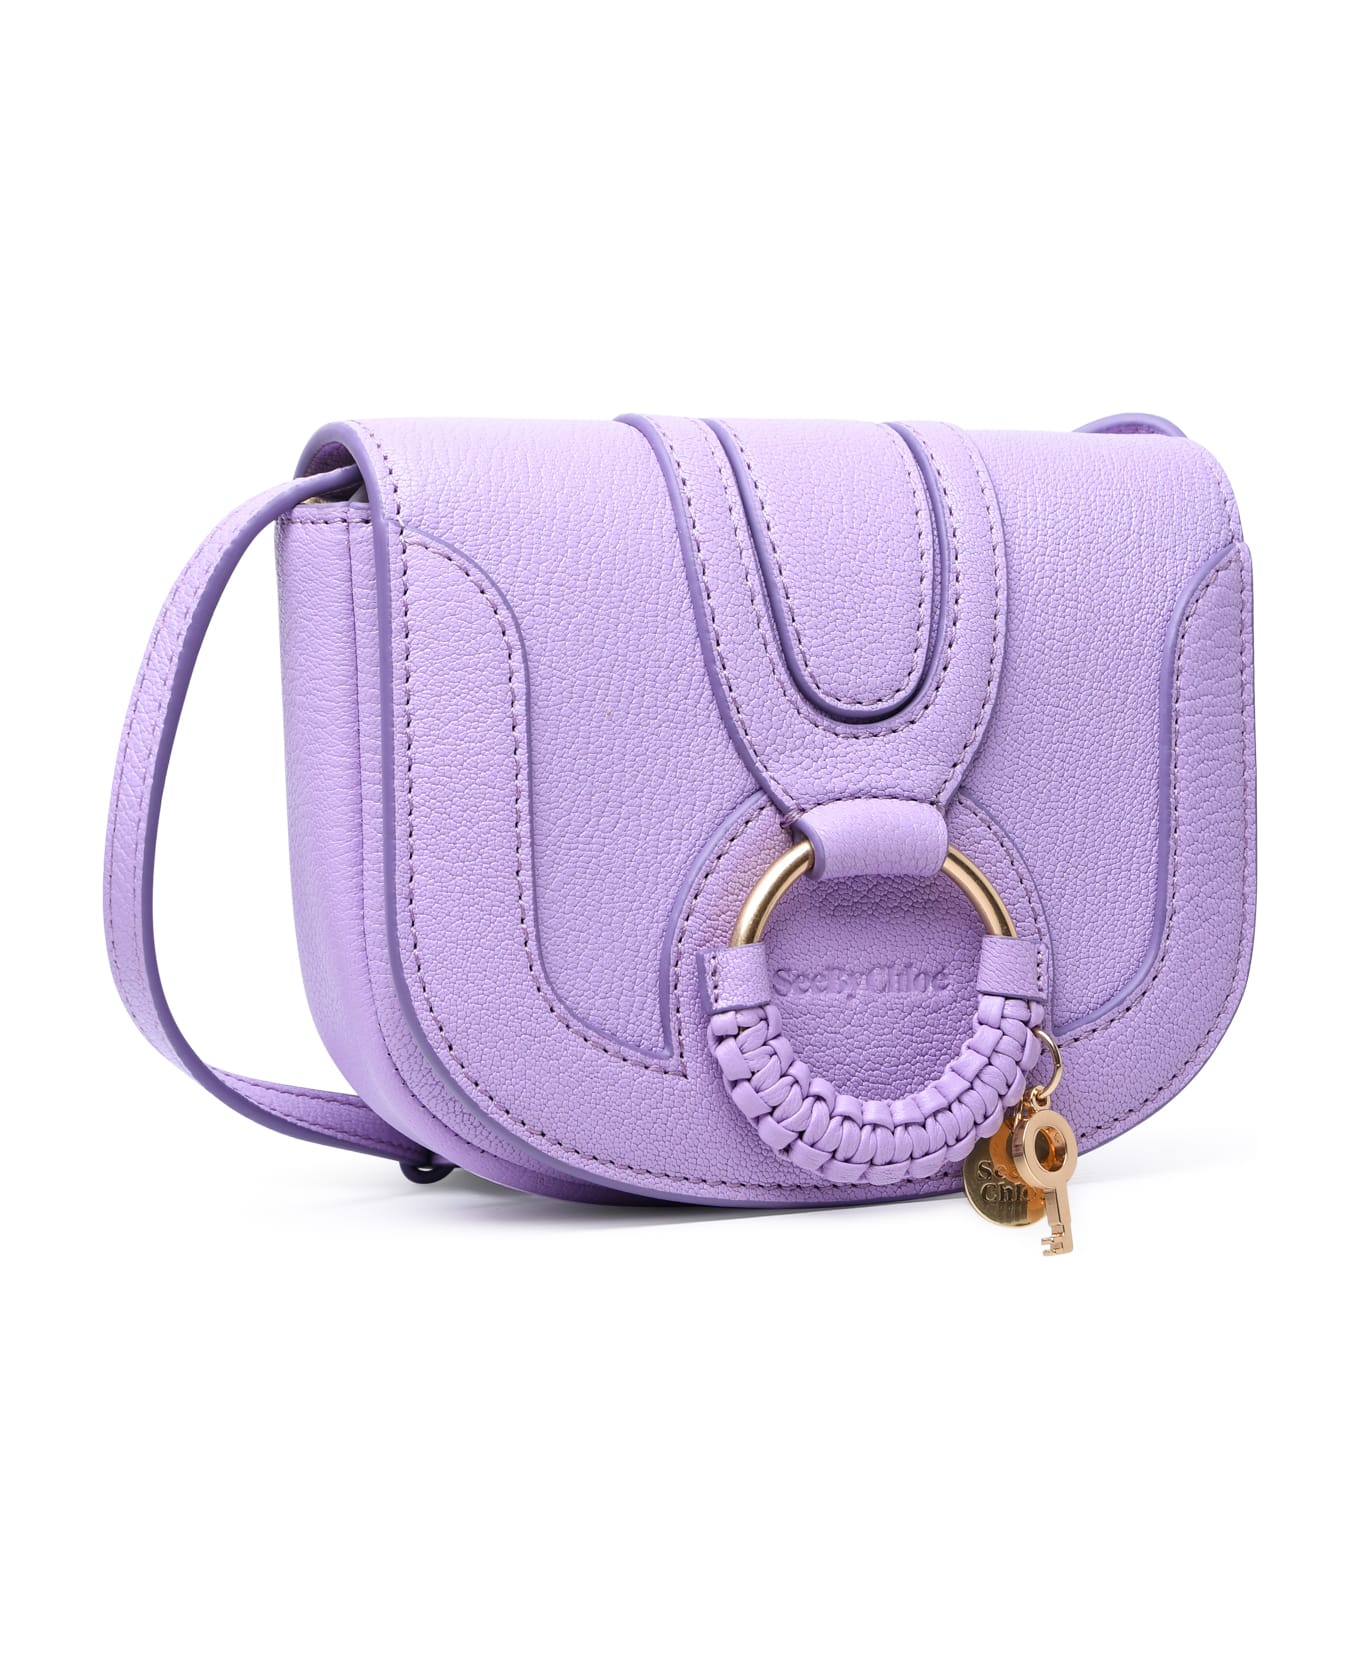 See by Chloé 'hana' Small Lilac Leather Bag - Lilla